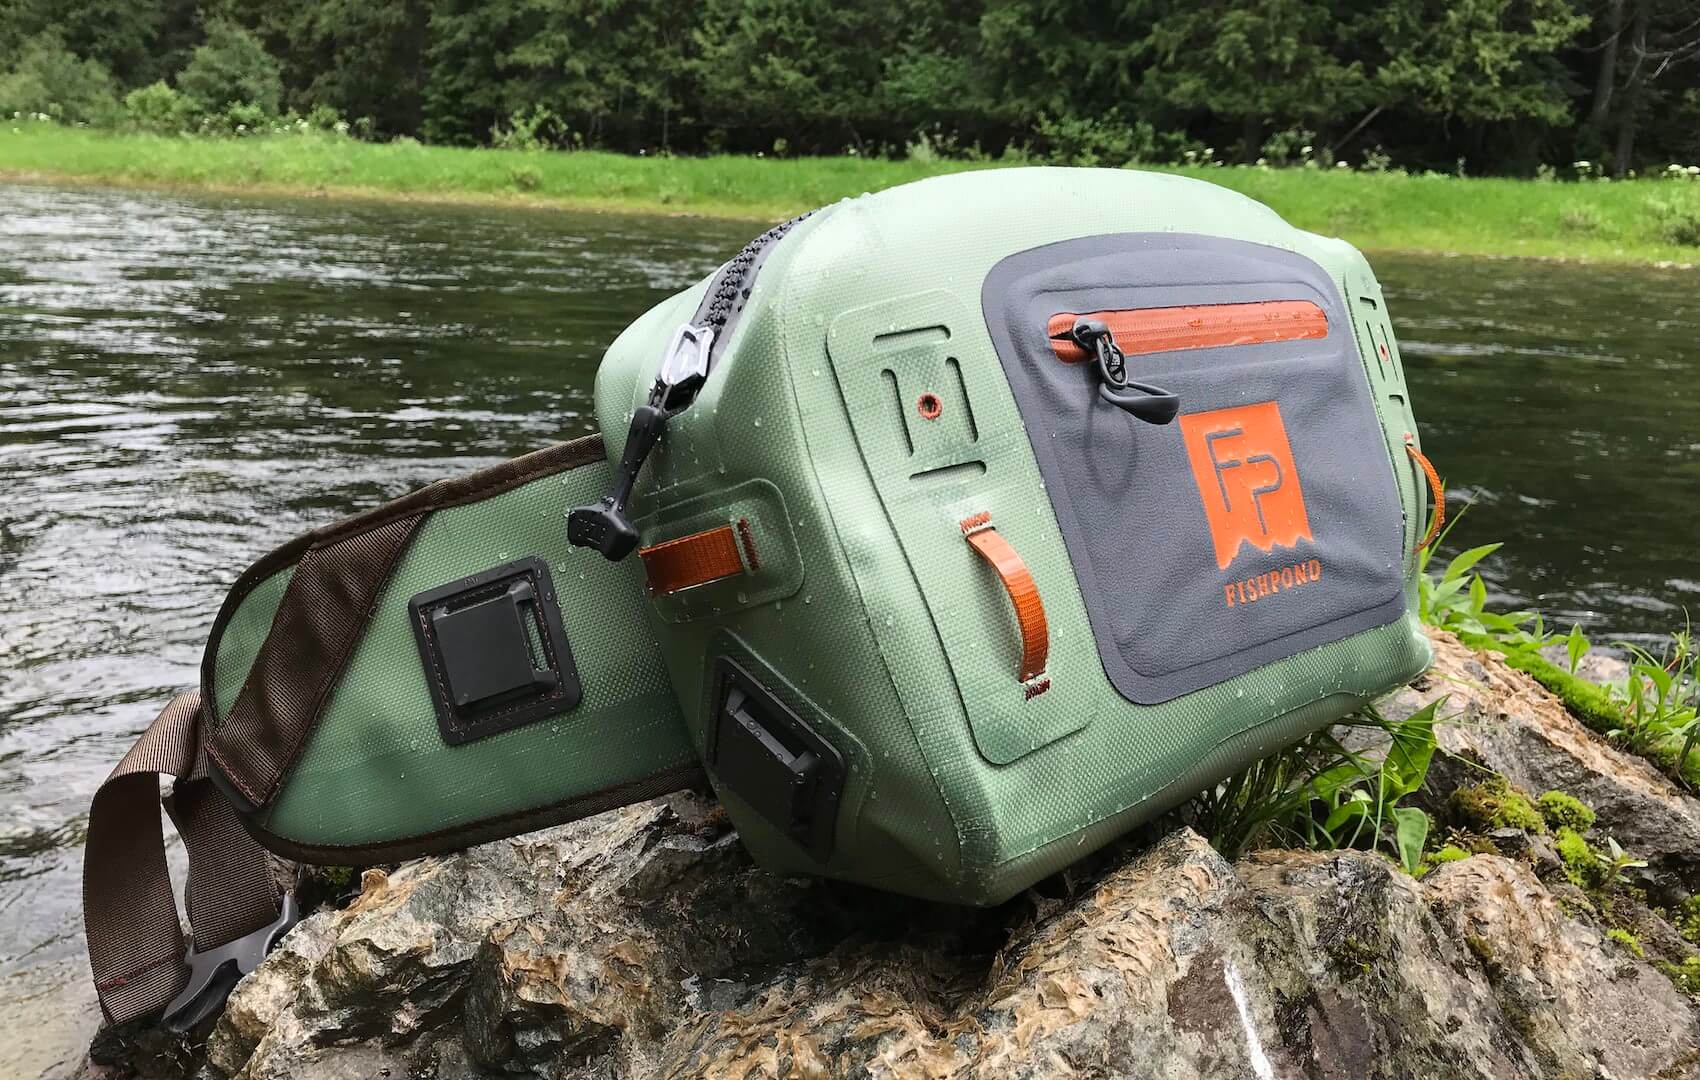 Fishpond Thunderhead Submersible Lumbar Pack Review - Man Makes Fire